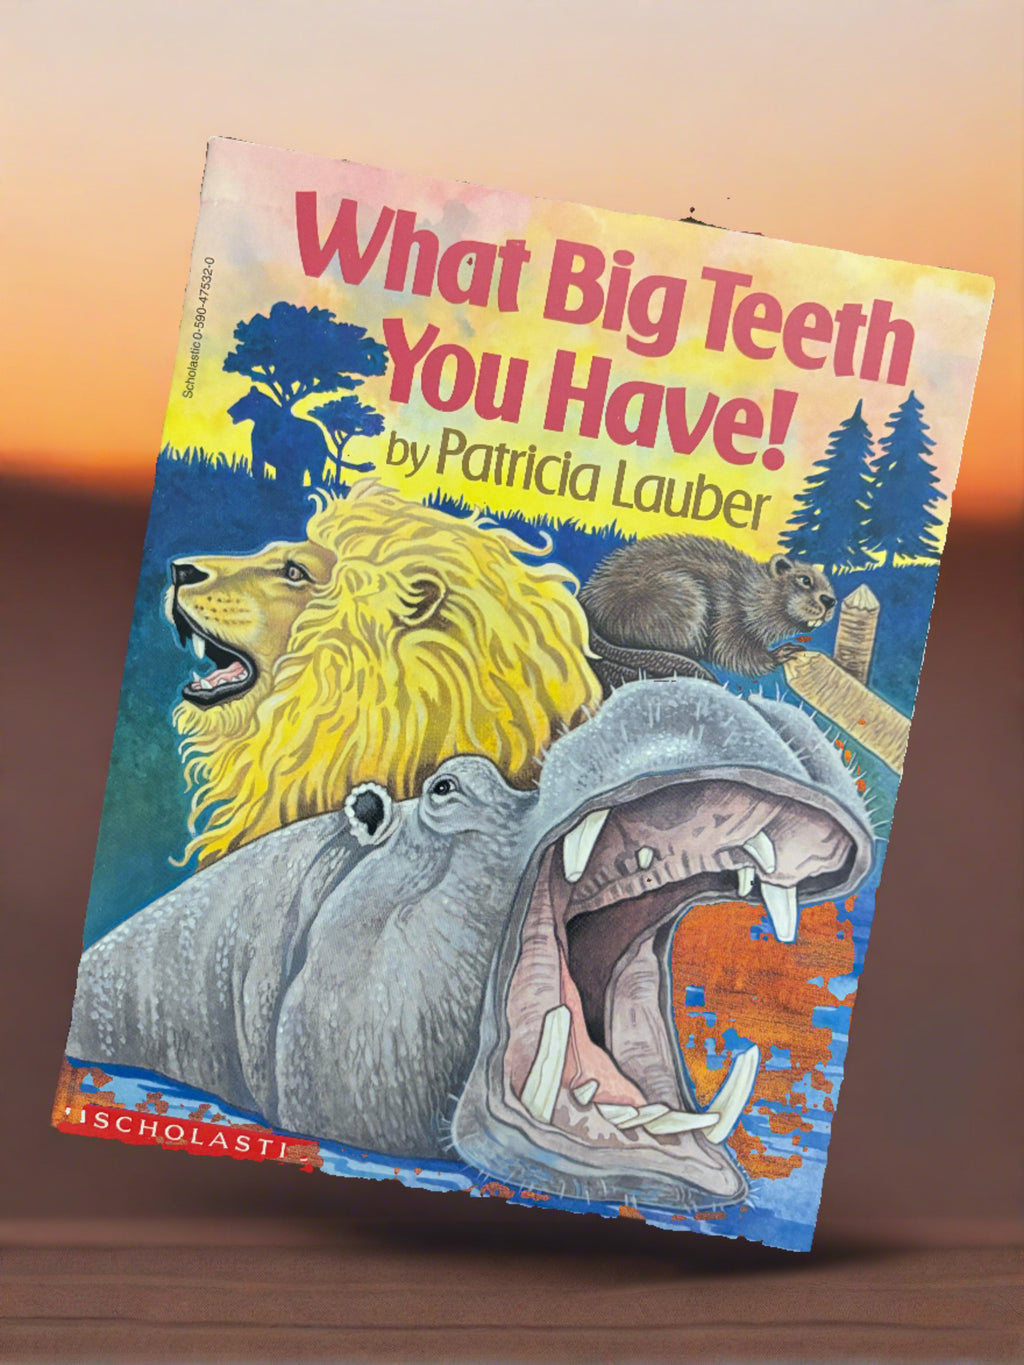 What Big Teeth You Have!- By Patricia Lauber